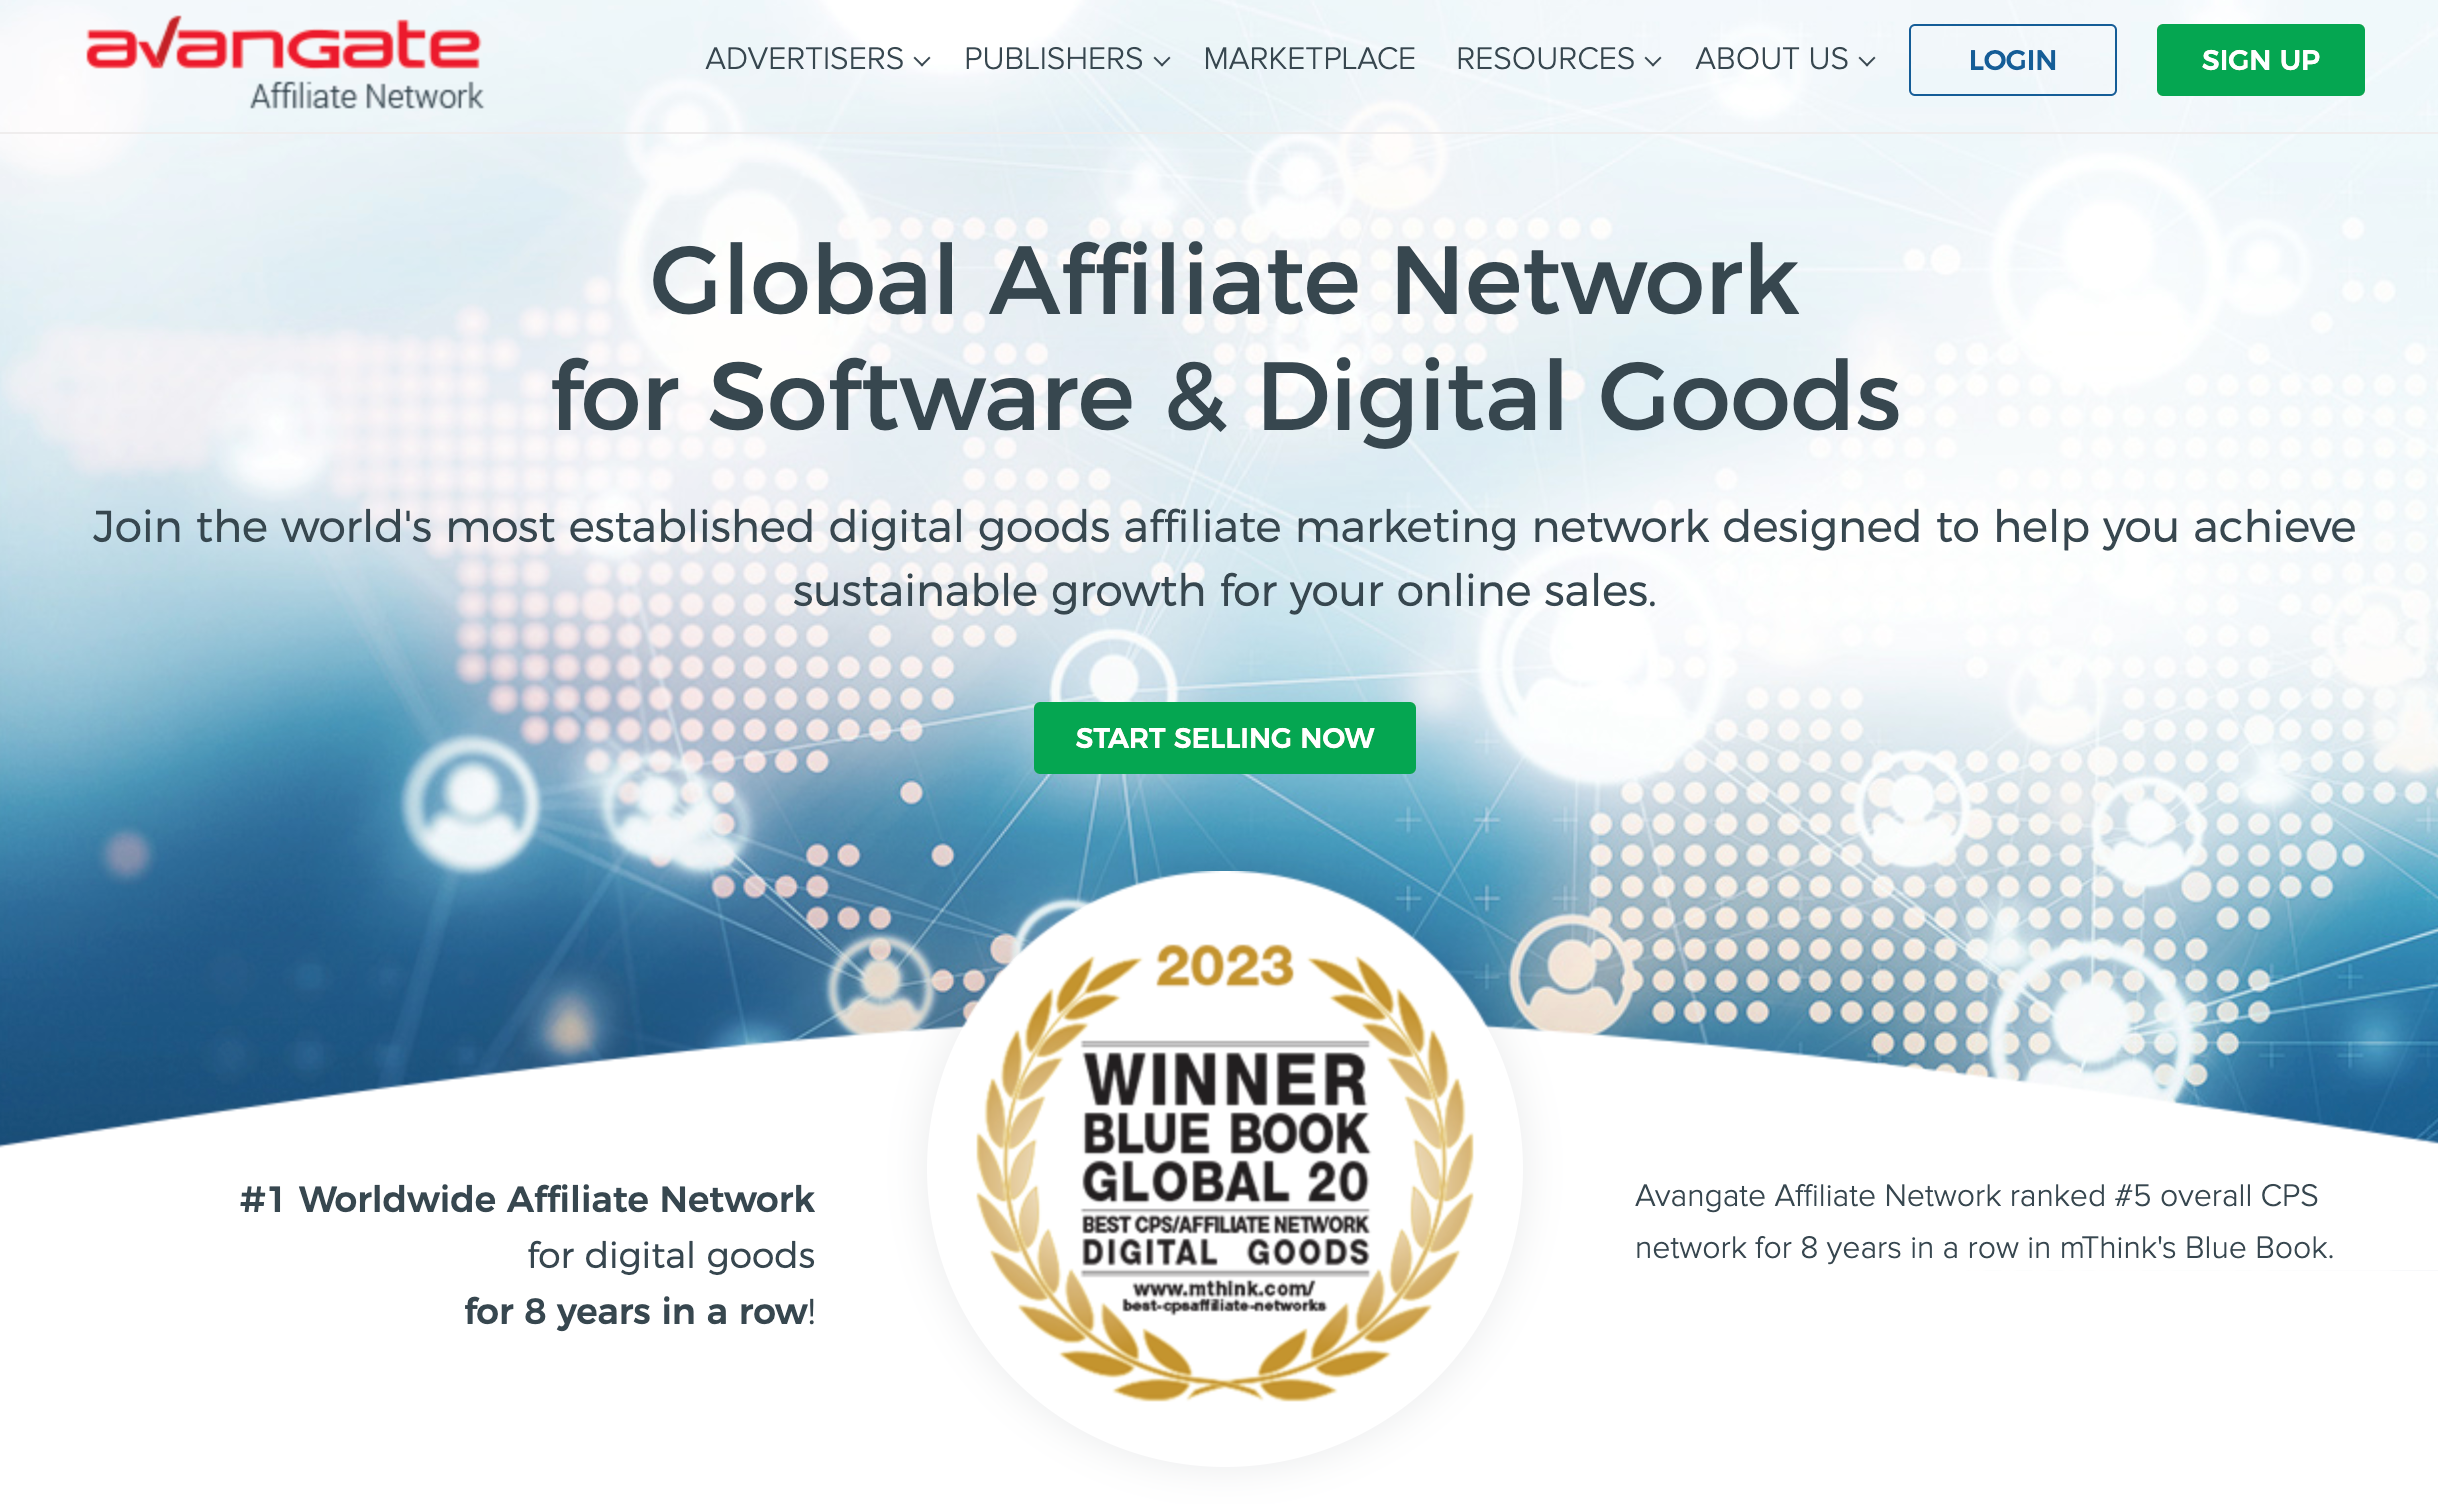 Avangate affiliate network with 2023 Blue Book Award icon.